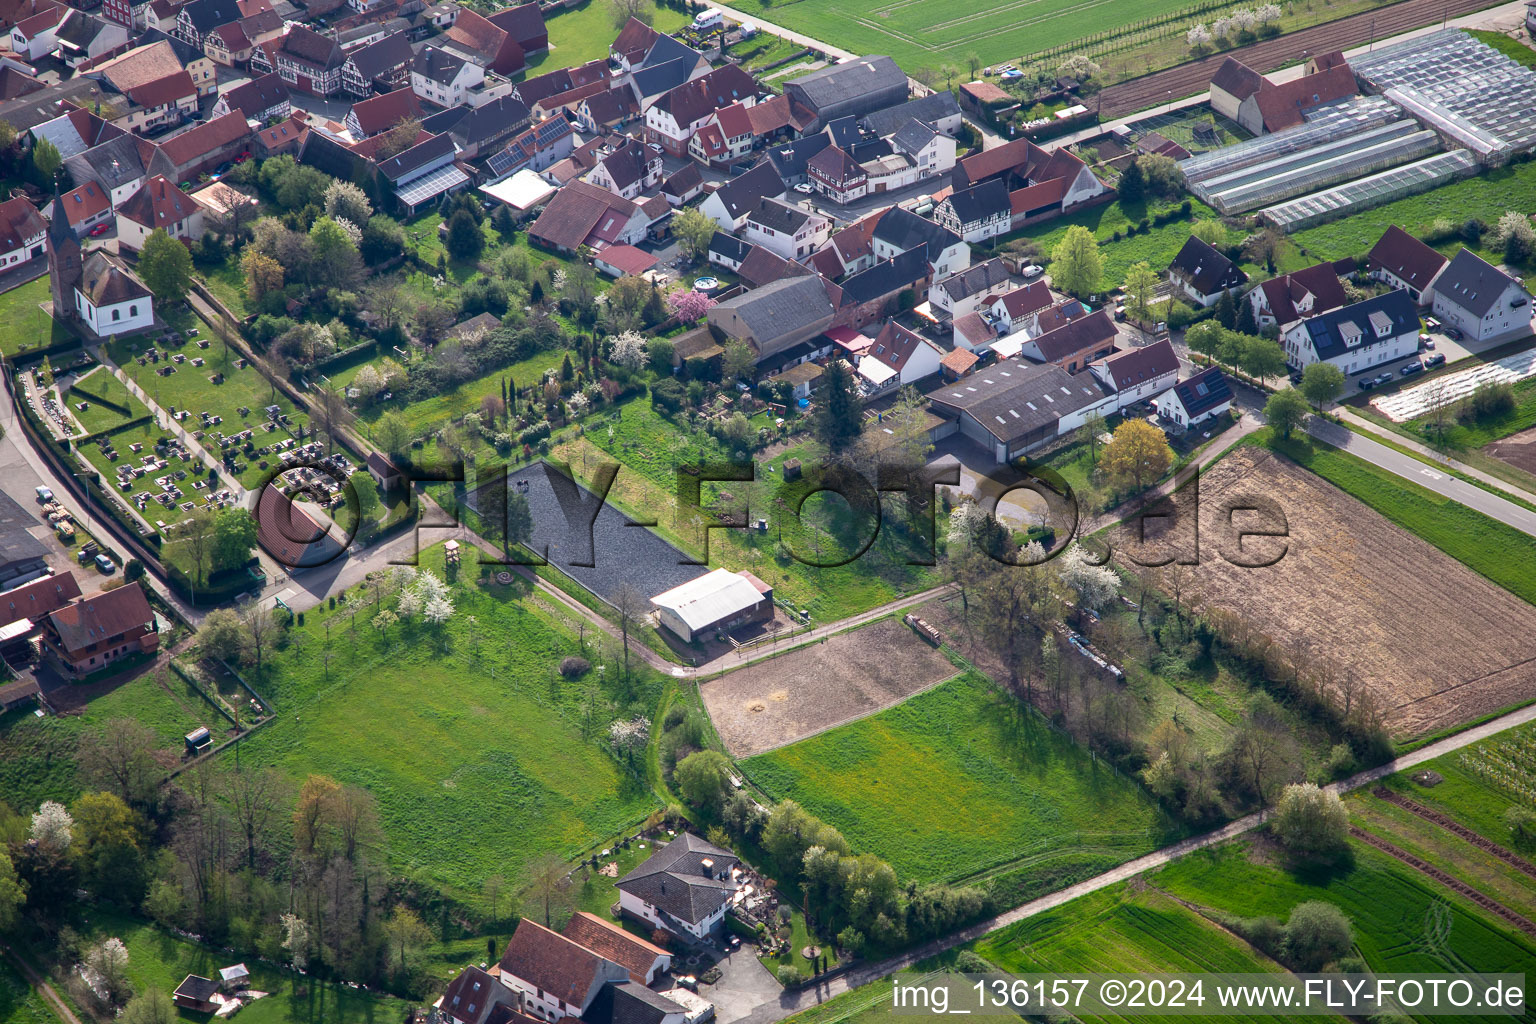 Aerial view of Equestrian facility at the cemetery in Winden in the state Rhineland-Palatinate, Germany